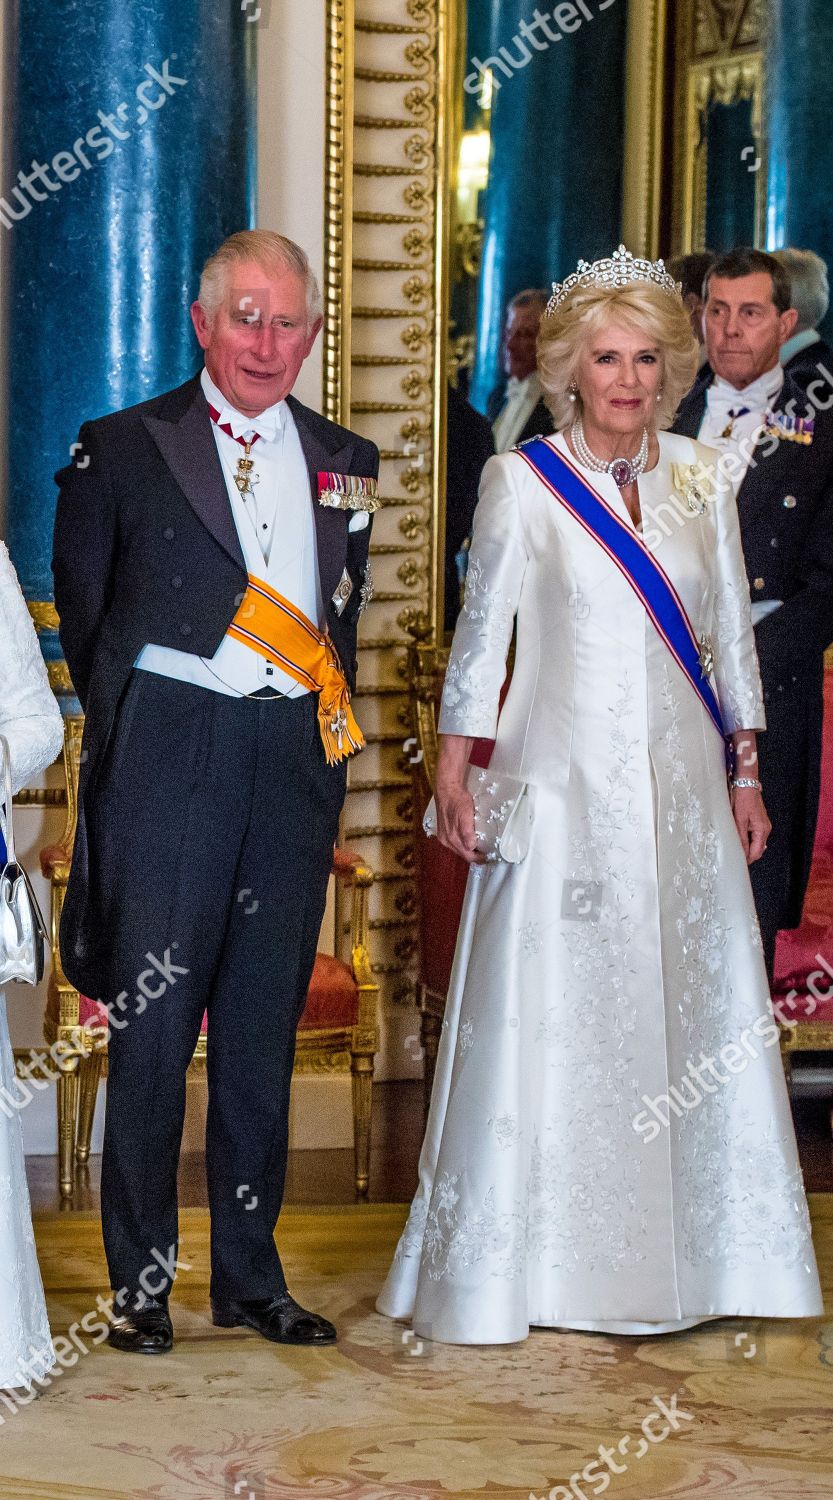 state-visit-of-the-king-and-queen-of-the-netherlands-london-uk-shutterstock-editorial-9942632bd.jpg